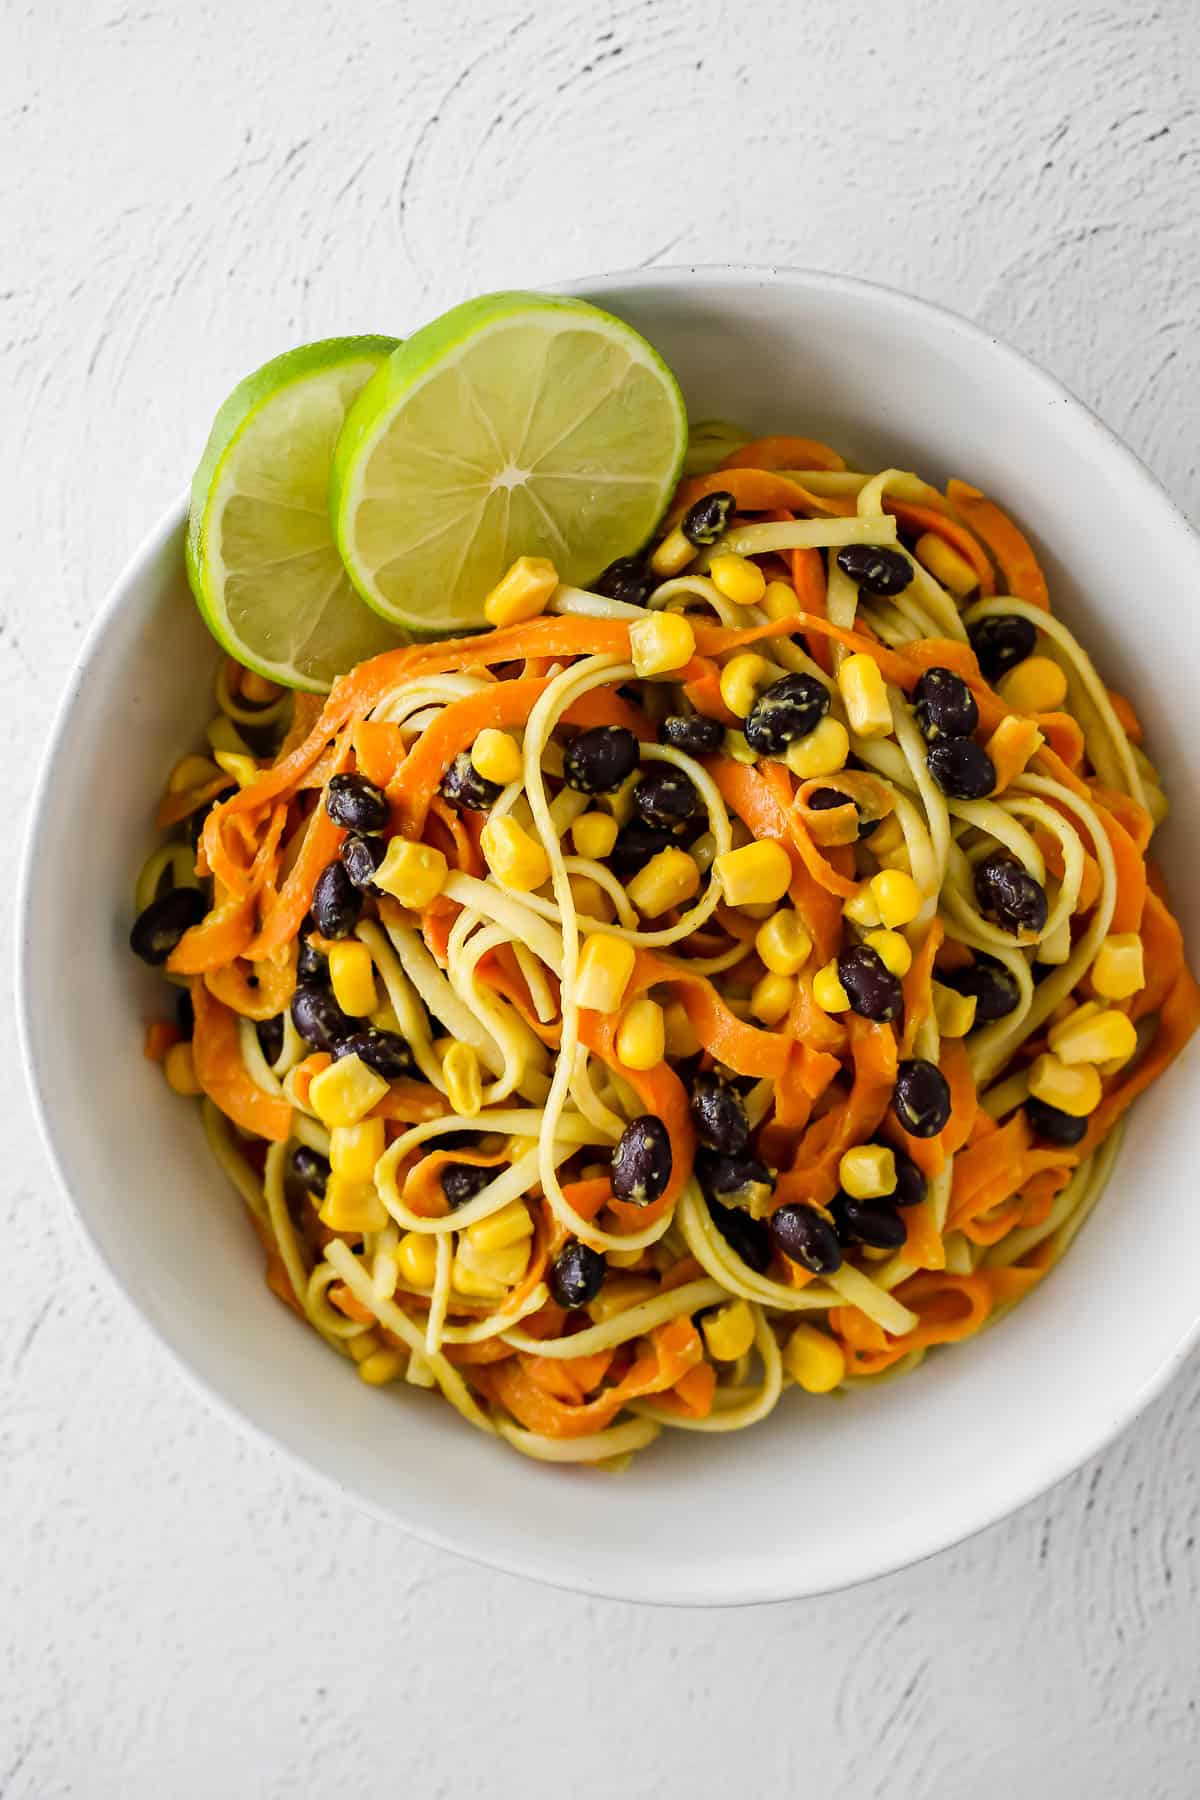 Zoodles, Sweet Potato Noodles and More: How to Use Your Spiralizer